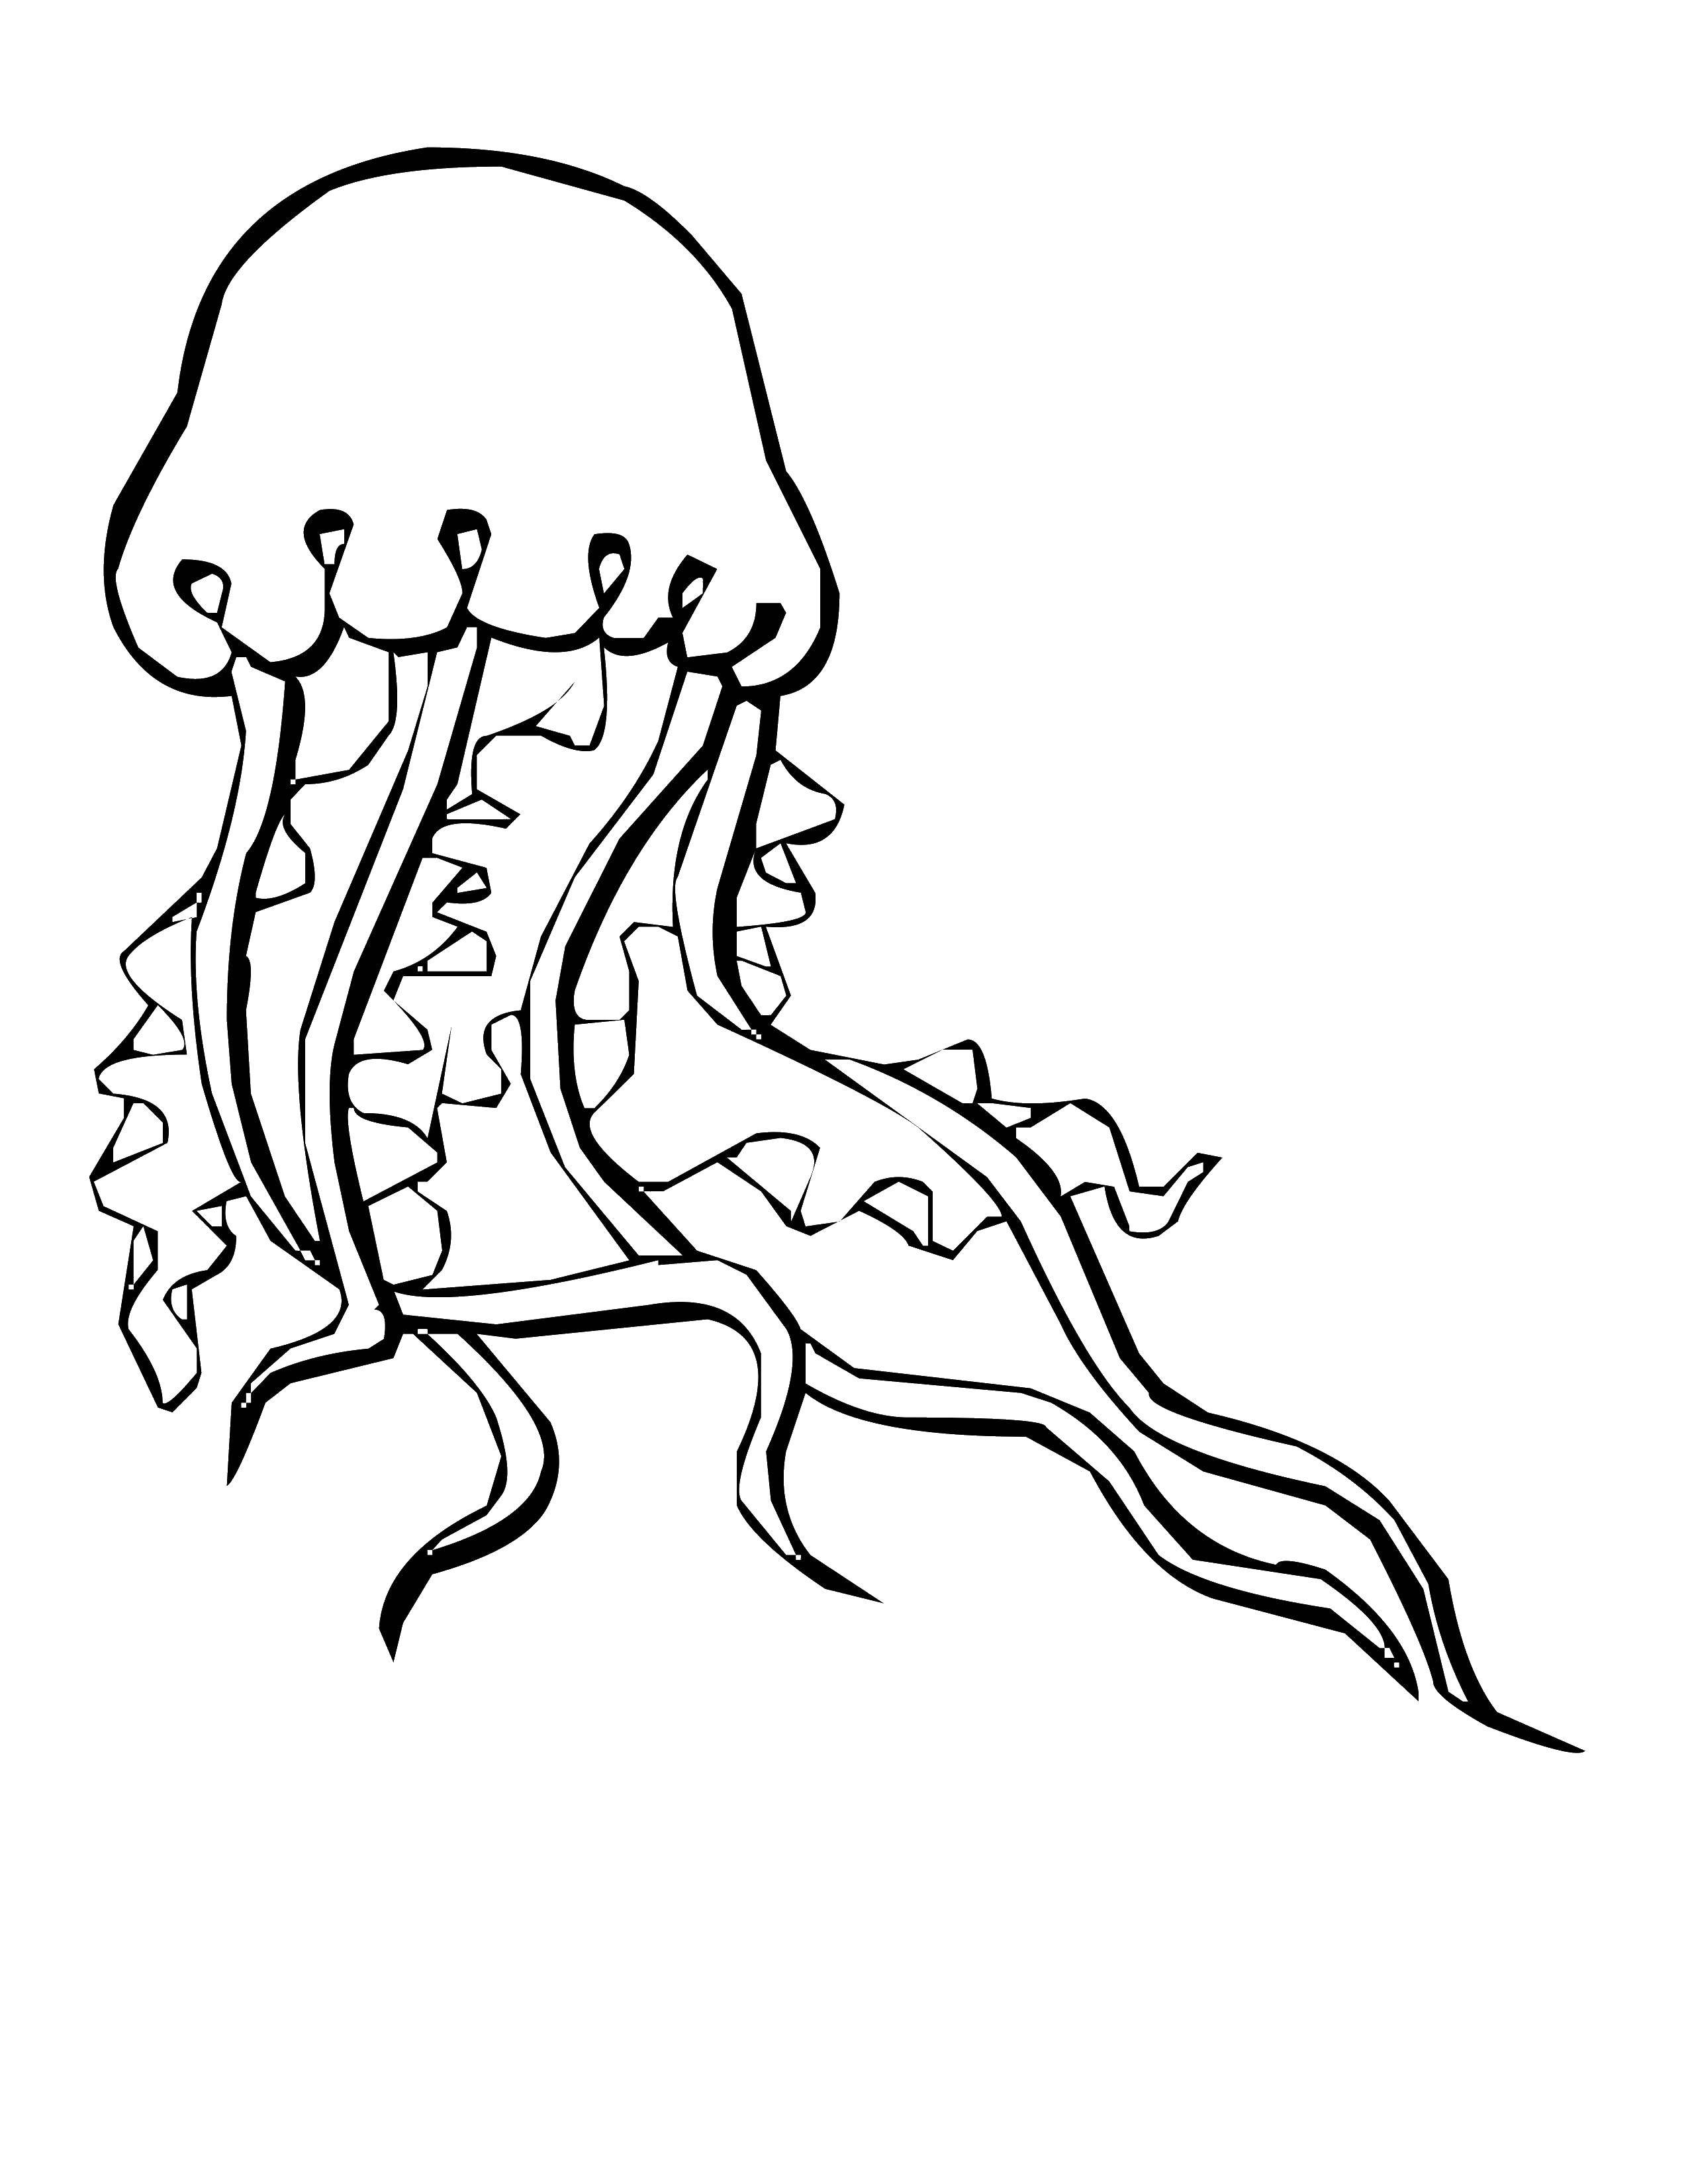 Coloring Huge dangerous jellyfish. Category Sea animals. Tags:  Medusa.